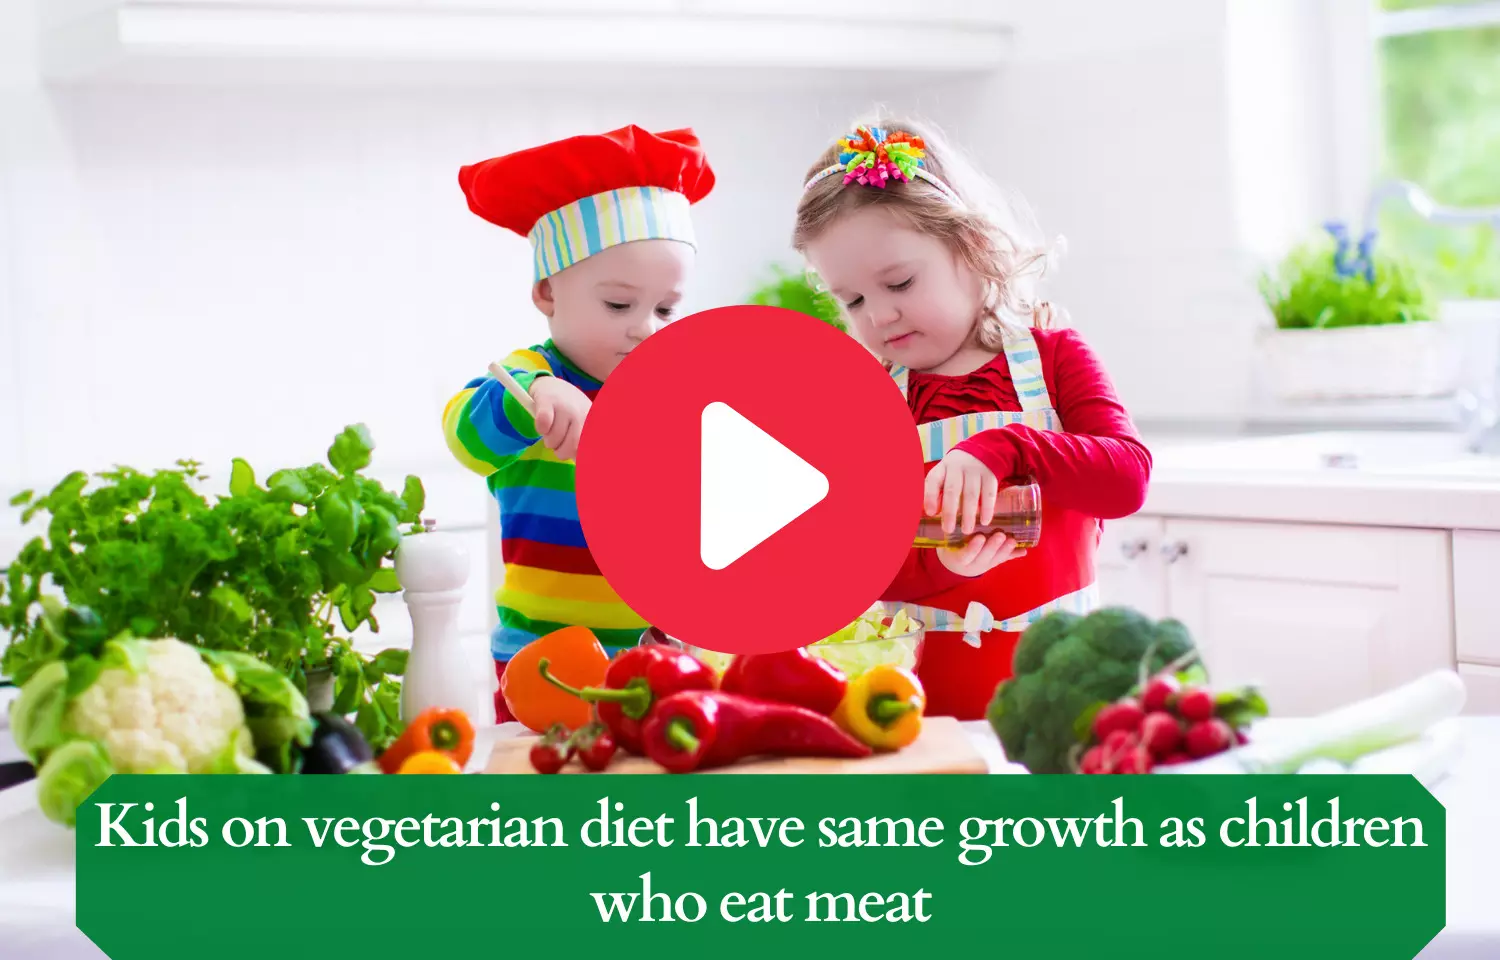 Kids on vegetarian diet are no diiferent than children who eat meat